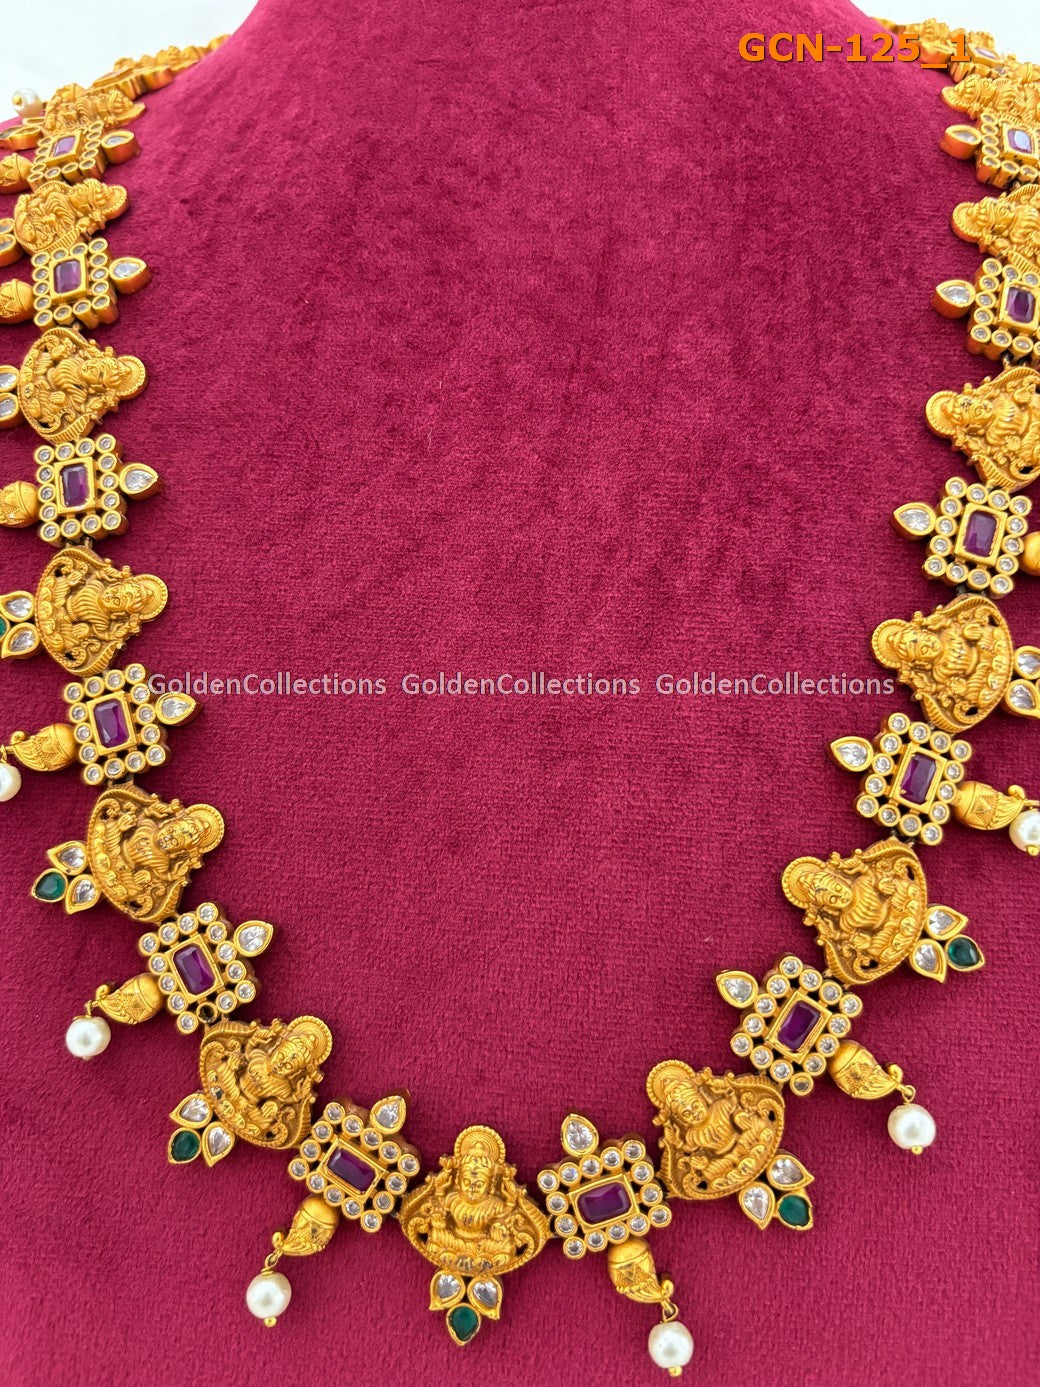 South Indian Necklace Online : Temple Style Necklace GoldenCollections 2